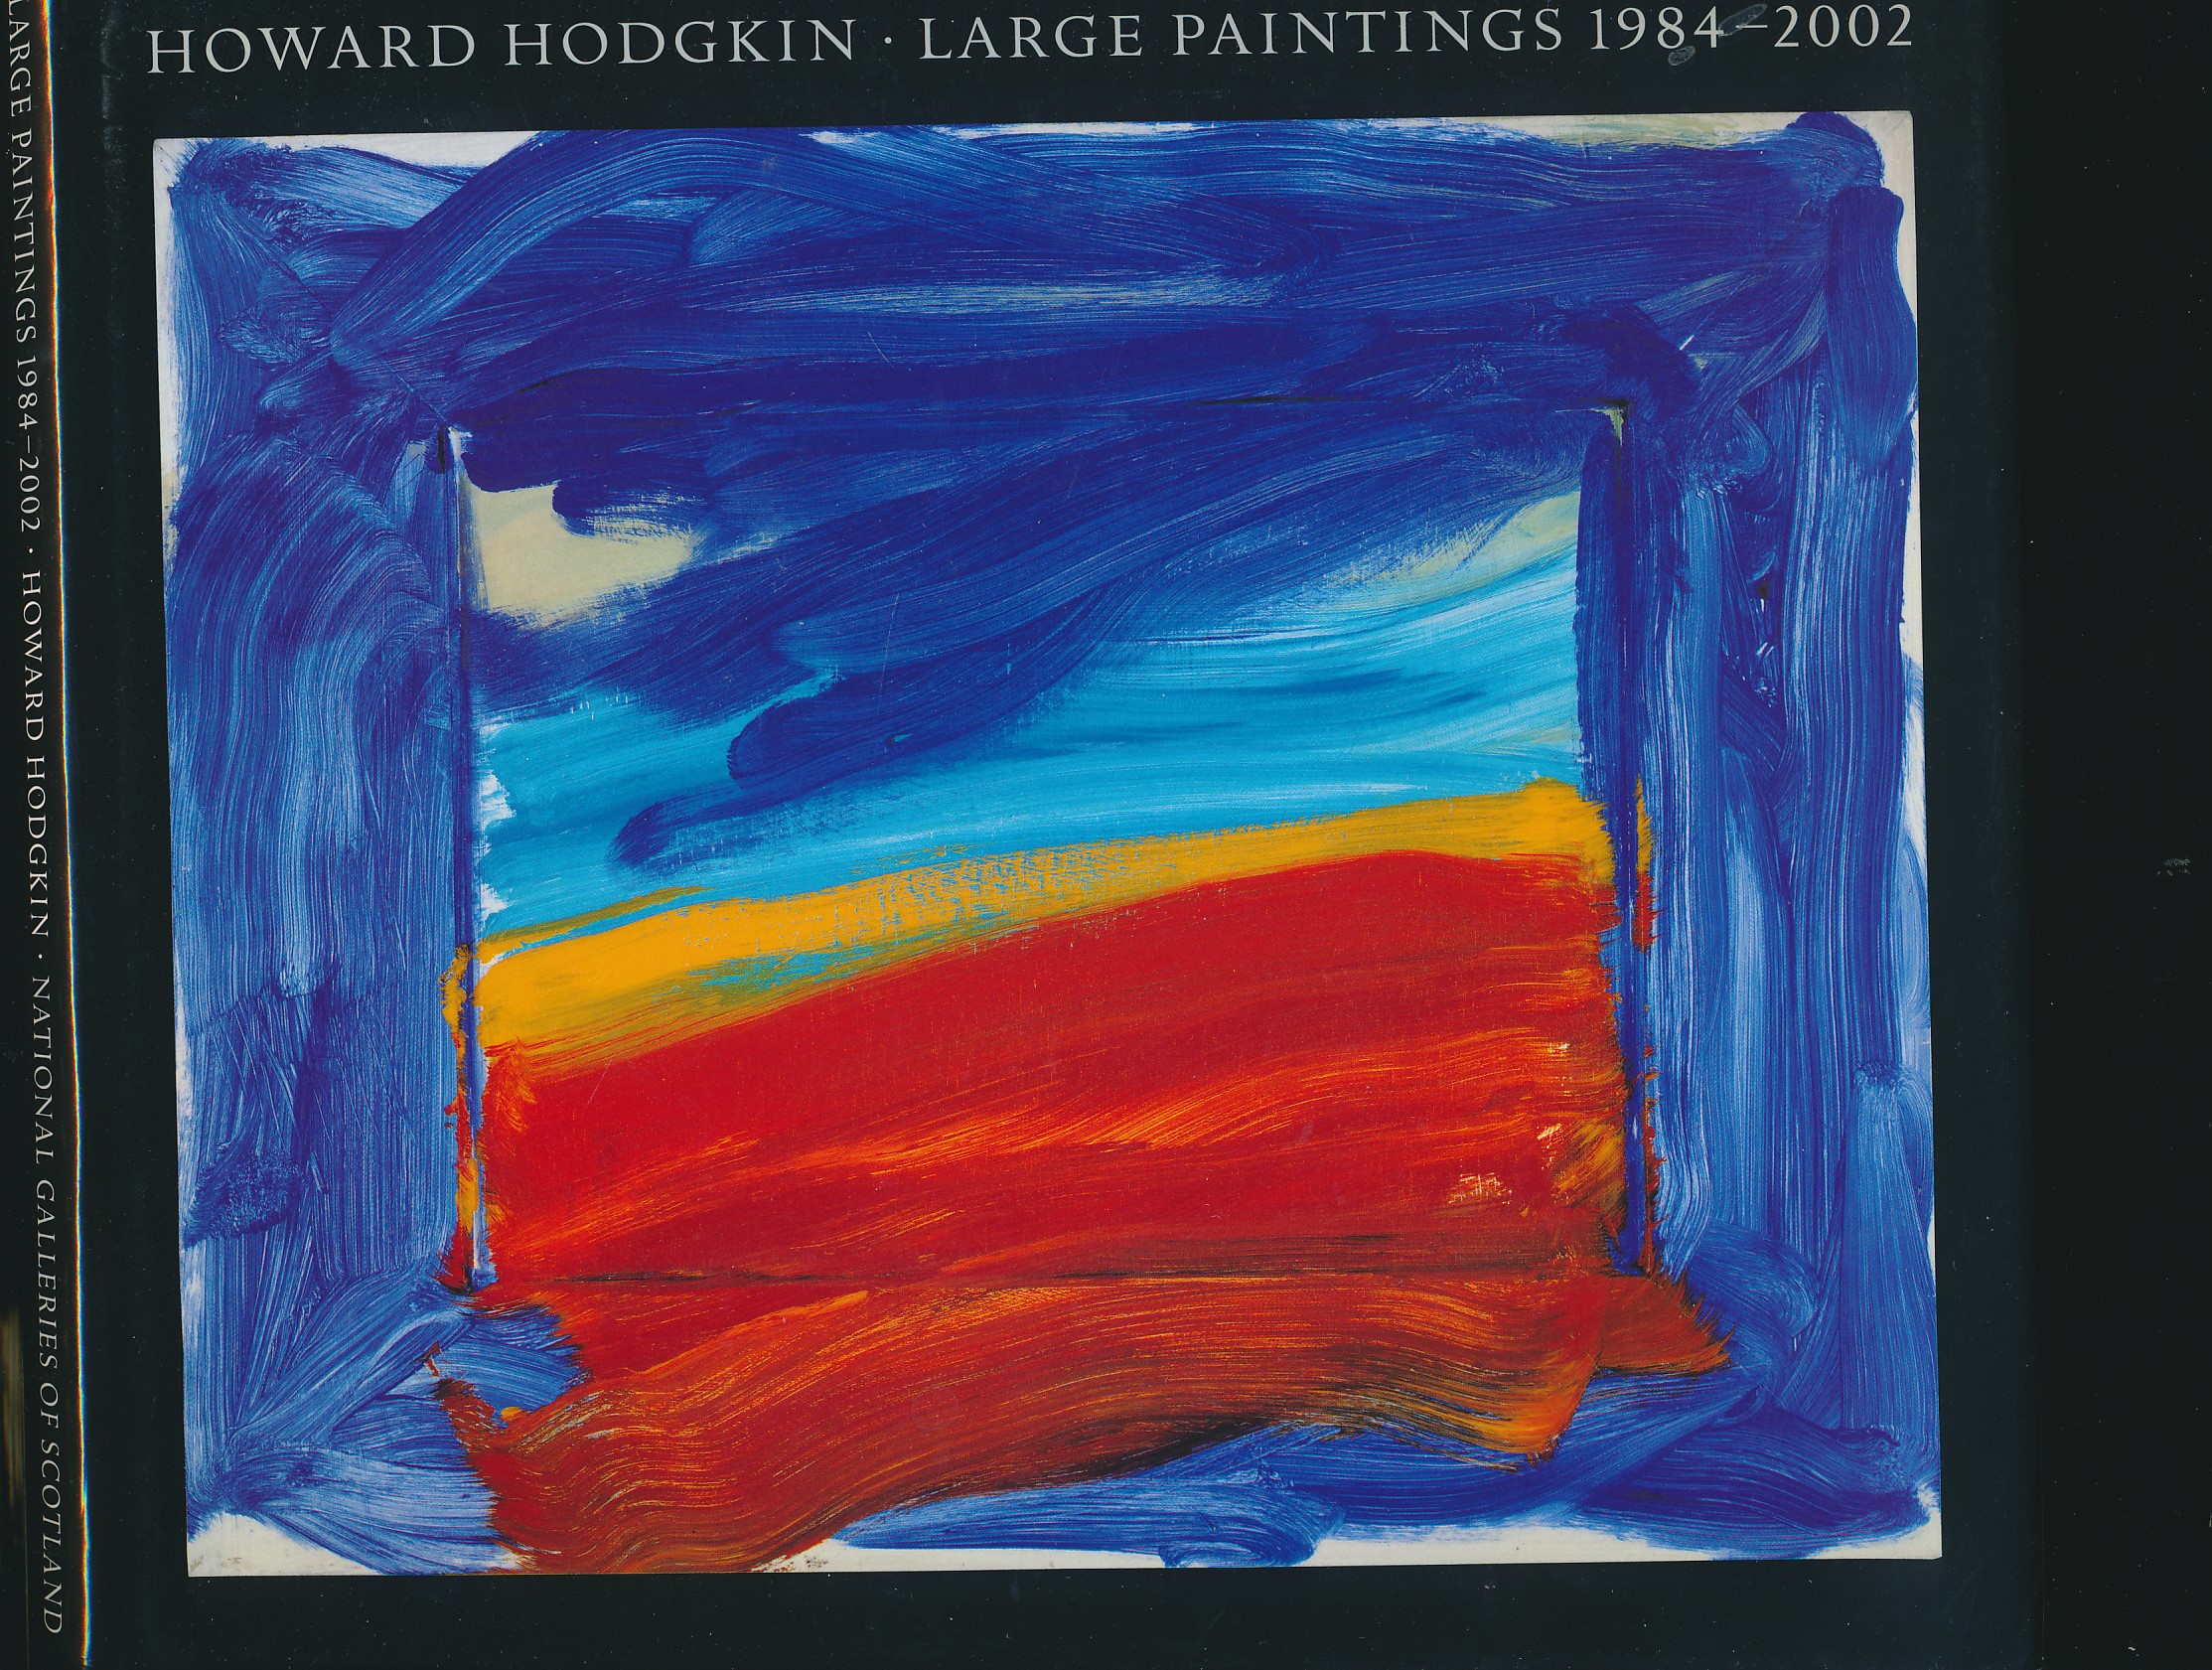 Large Paintings 1984-2002